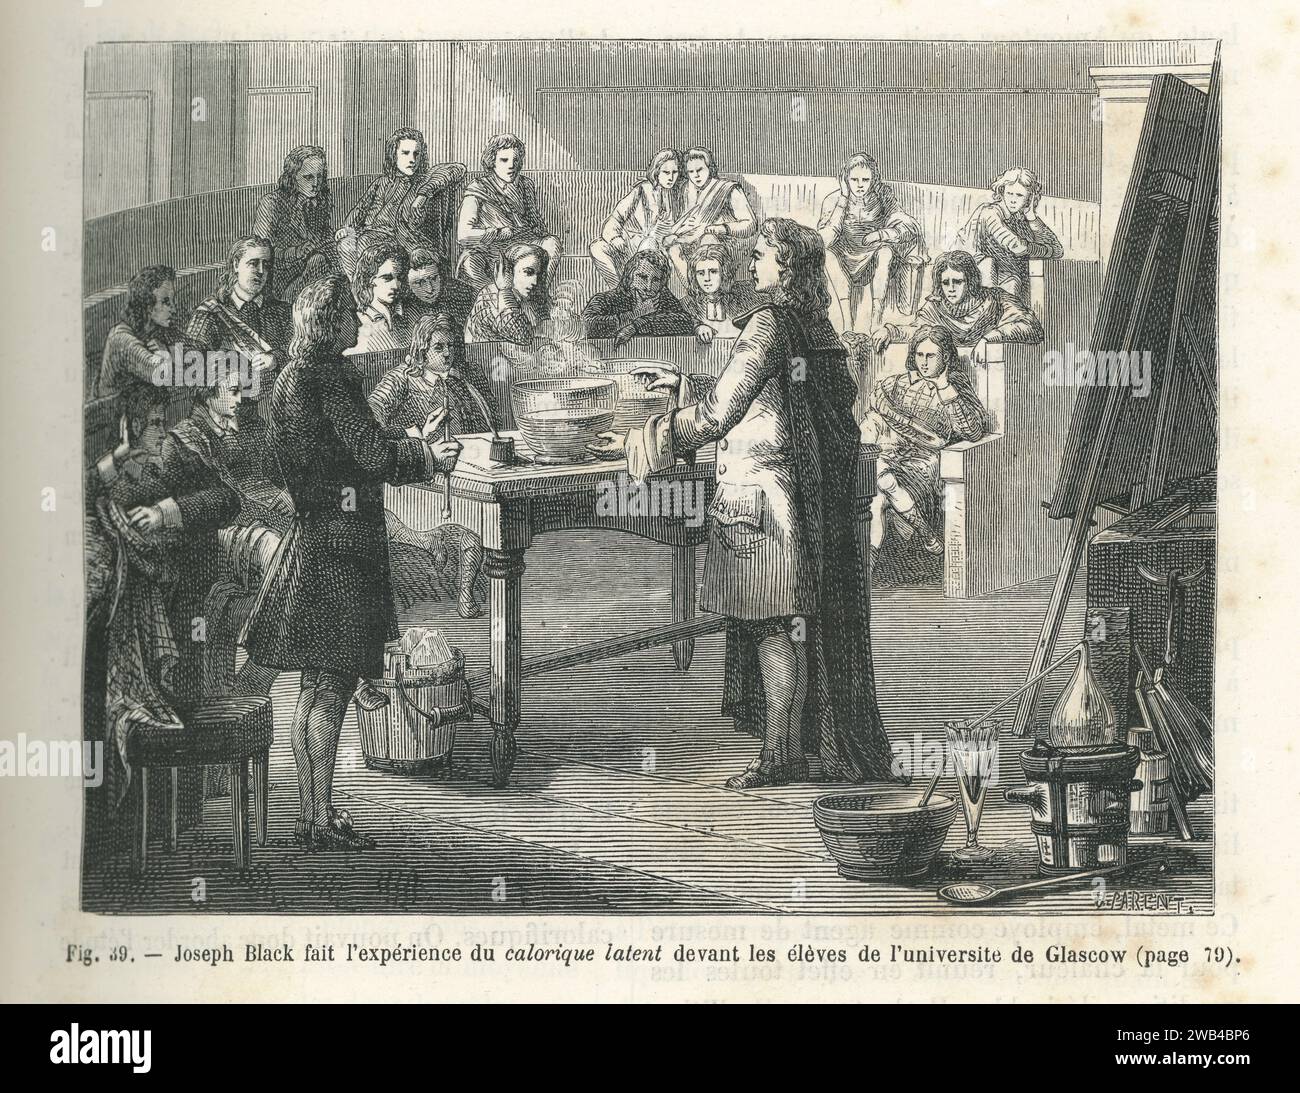 In 1761, Scottish physicist and chemist Joseph Black demonstrated 'latent heat' to students at Glasgow University, marking the beginnings of thermodynamics.  Illustration from 'Les Merveilles de la science ou description populaire des inventions modernes' written by Louis Figuier and published in 1867 by Furne, Jouvet et Cie. Stock Photo